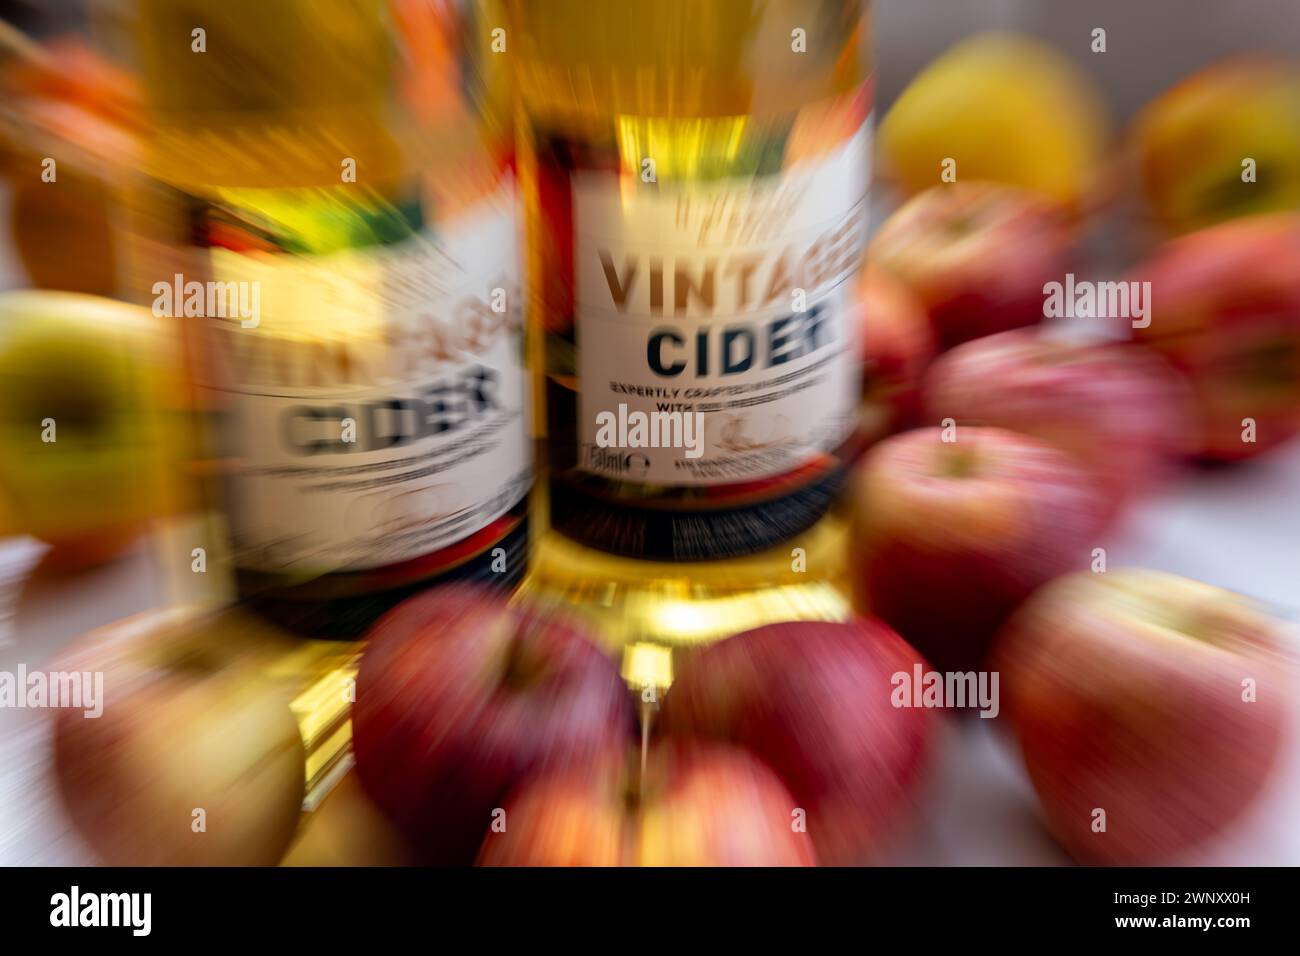 A zoom burst background of bottles of vintage cider surrounded by apples. Stock Photo